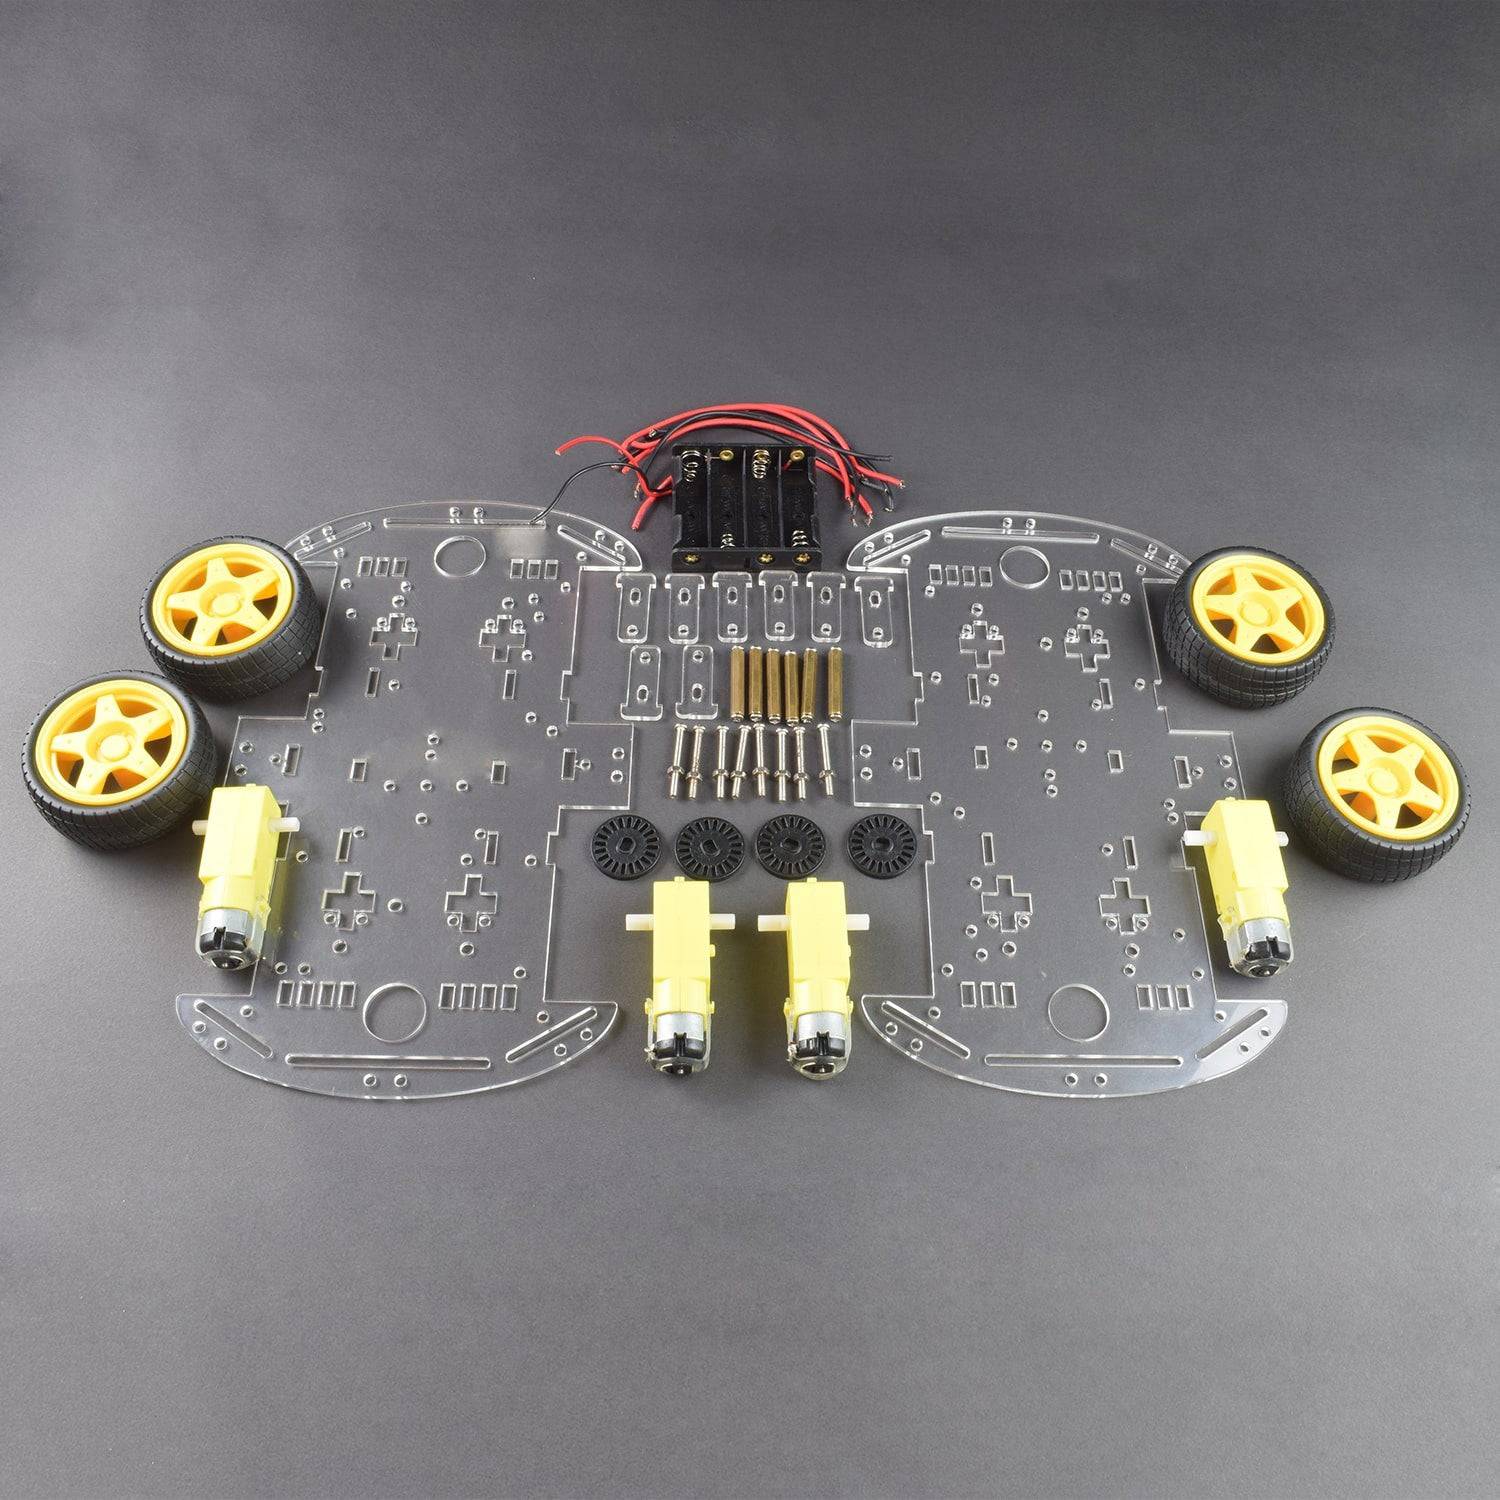 DIY 4WD Double-Deck Smart Robot Car Chassis Kits with Speed Encoder 4 Wheel 2 Layer Robot Smart car Chassis Kits- RC055 - REES52